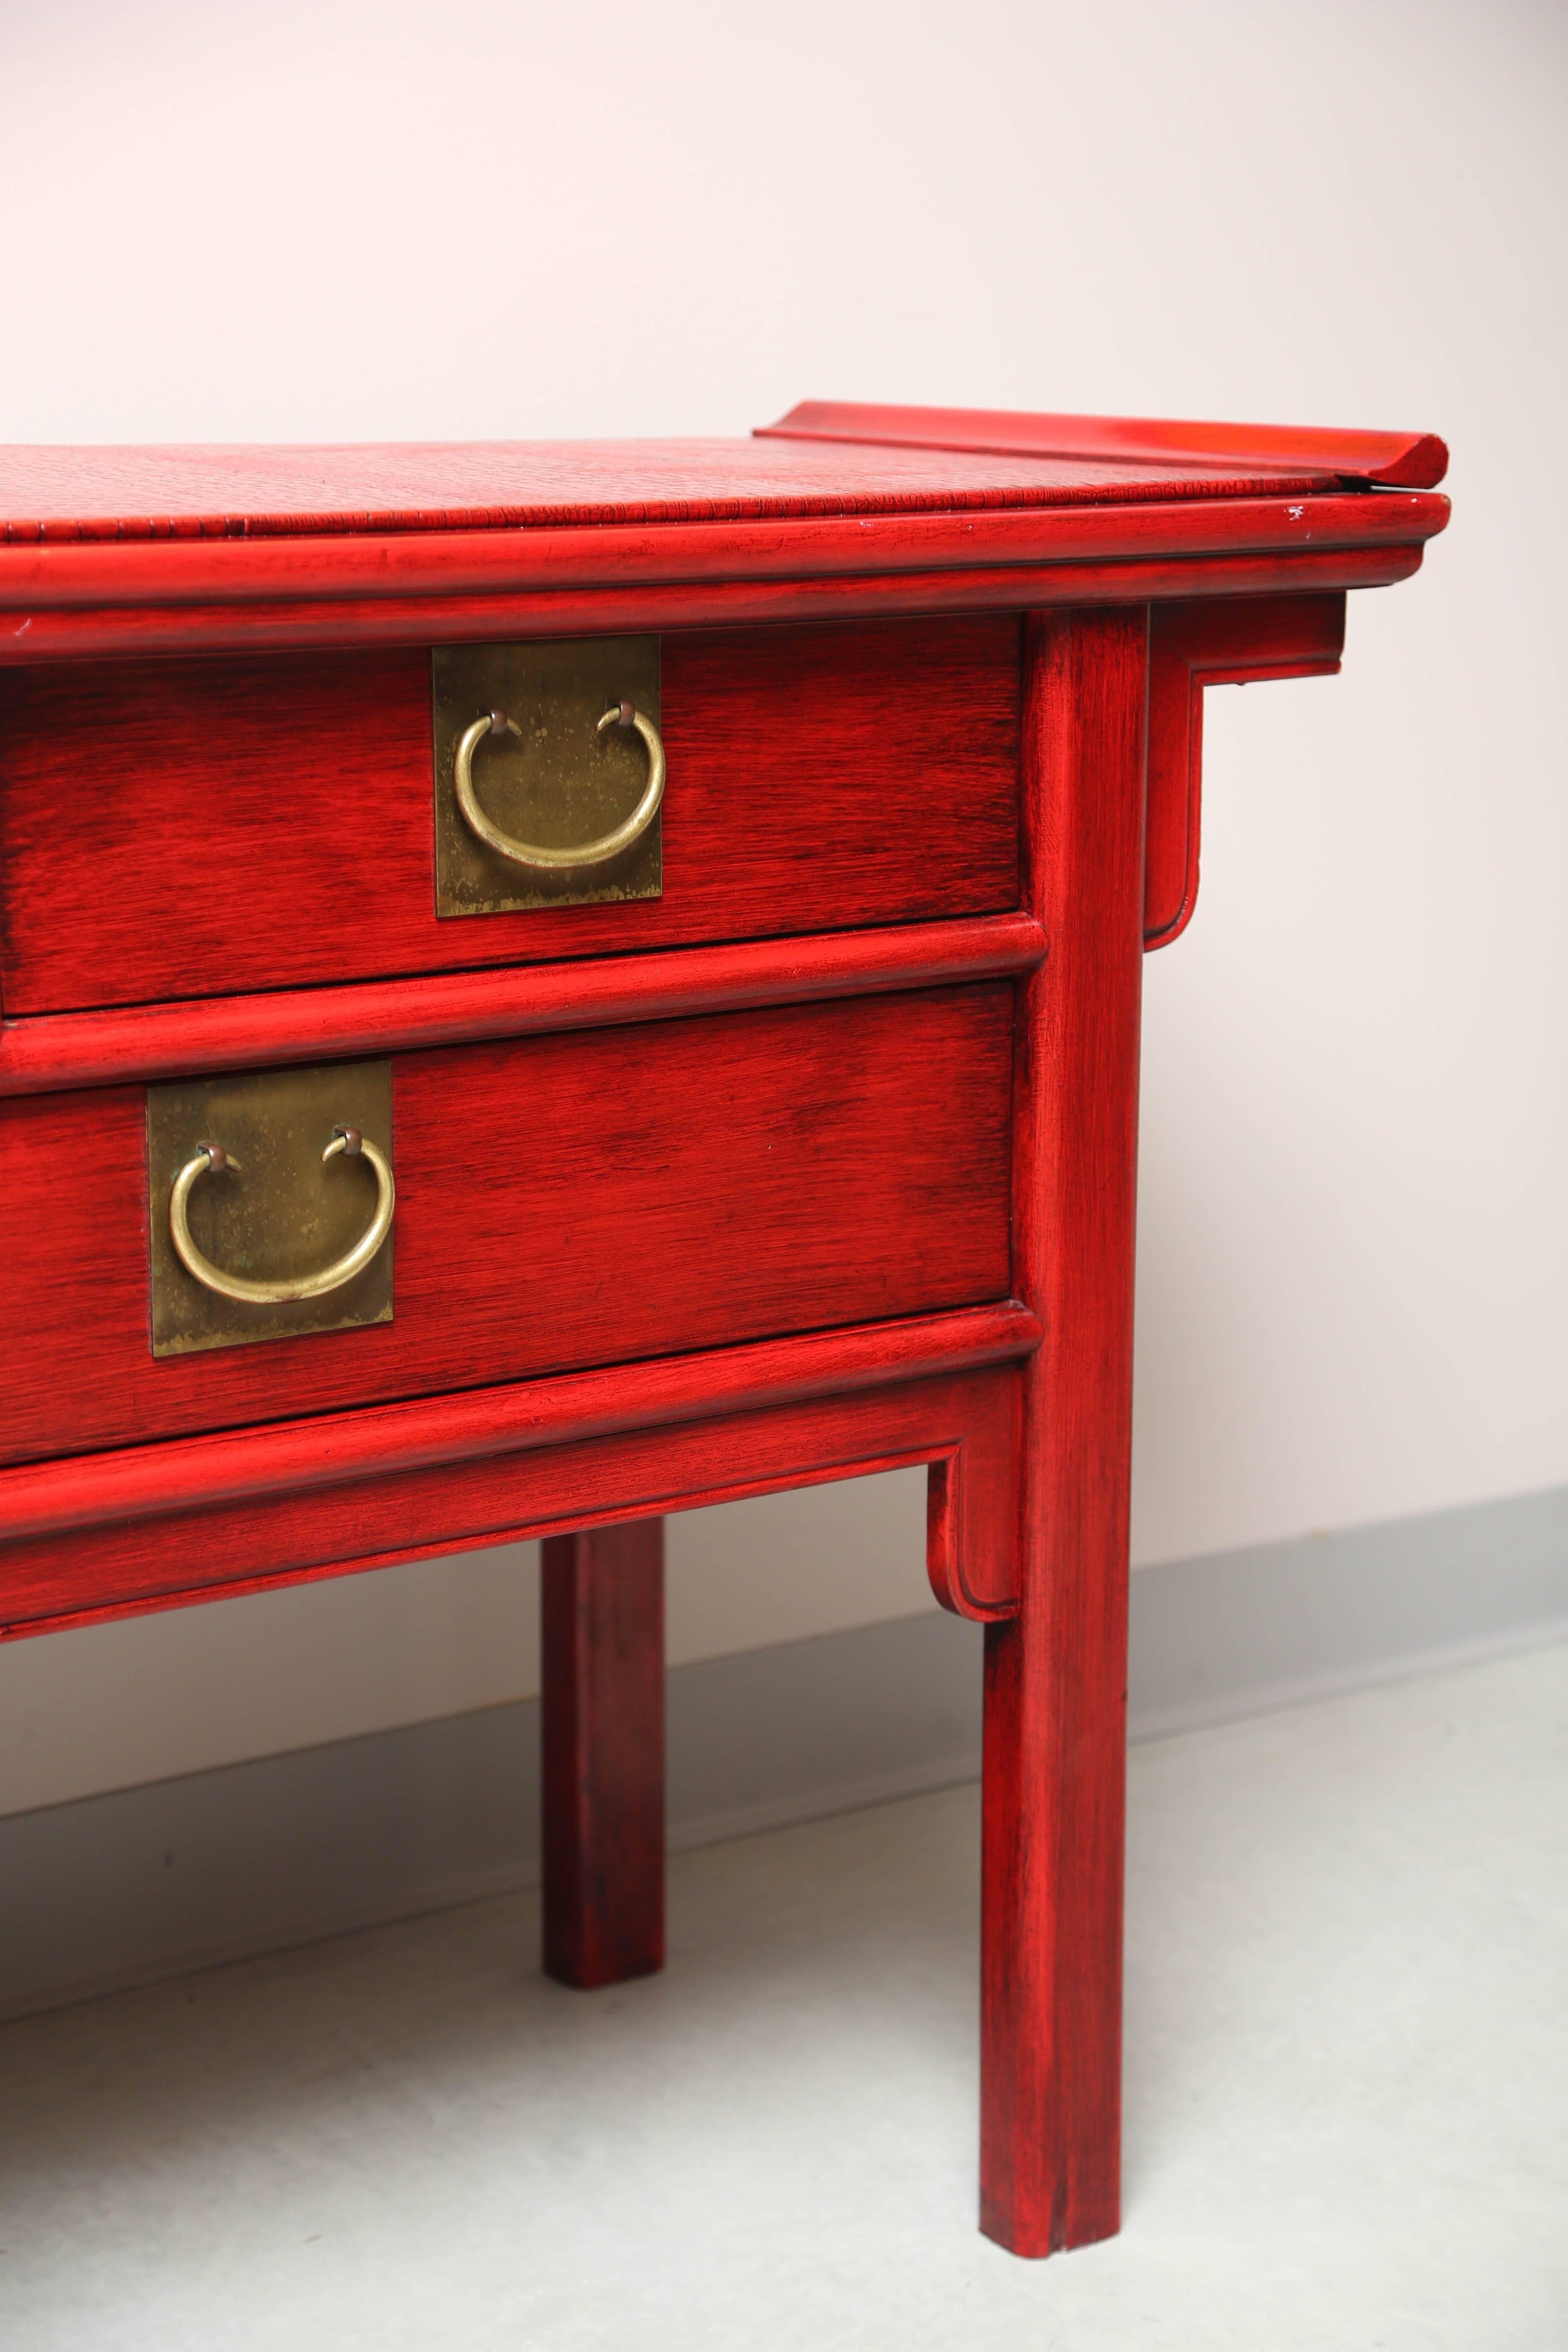 SALE!  SALE !SALE!  RED CONSOLE WITH FAUX SKIN oriental style  midcentury origin For Sale 2